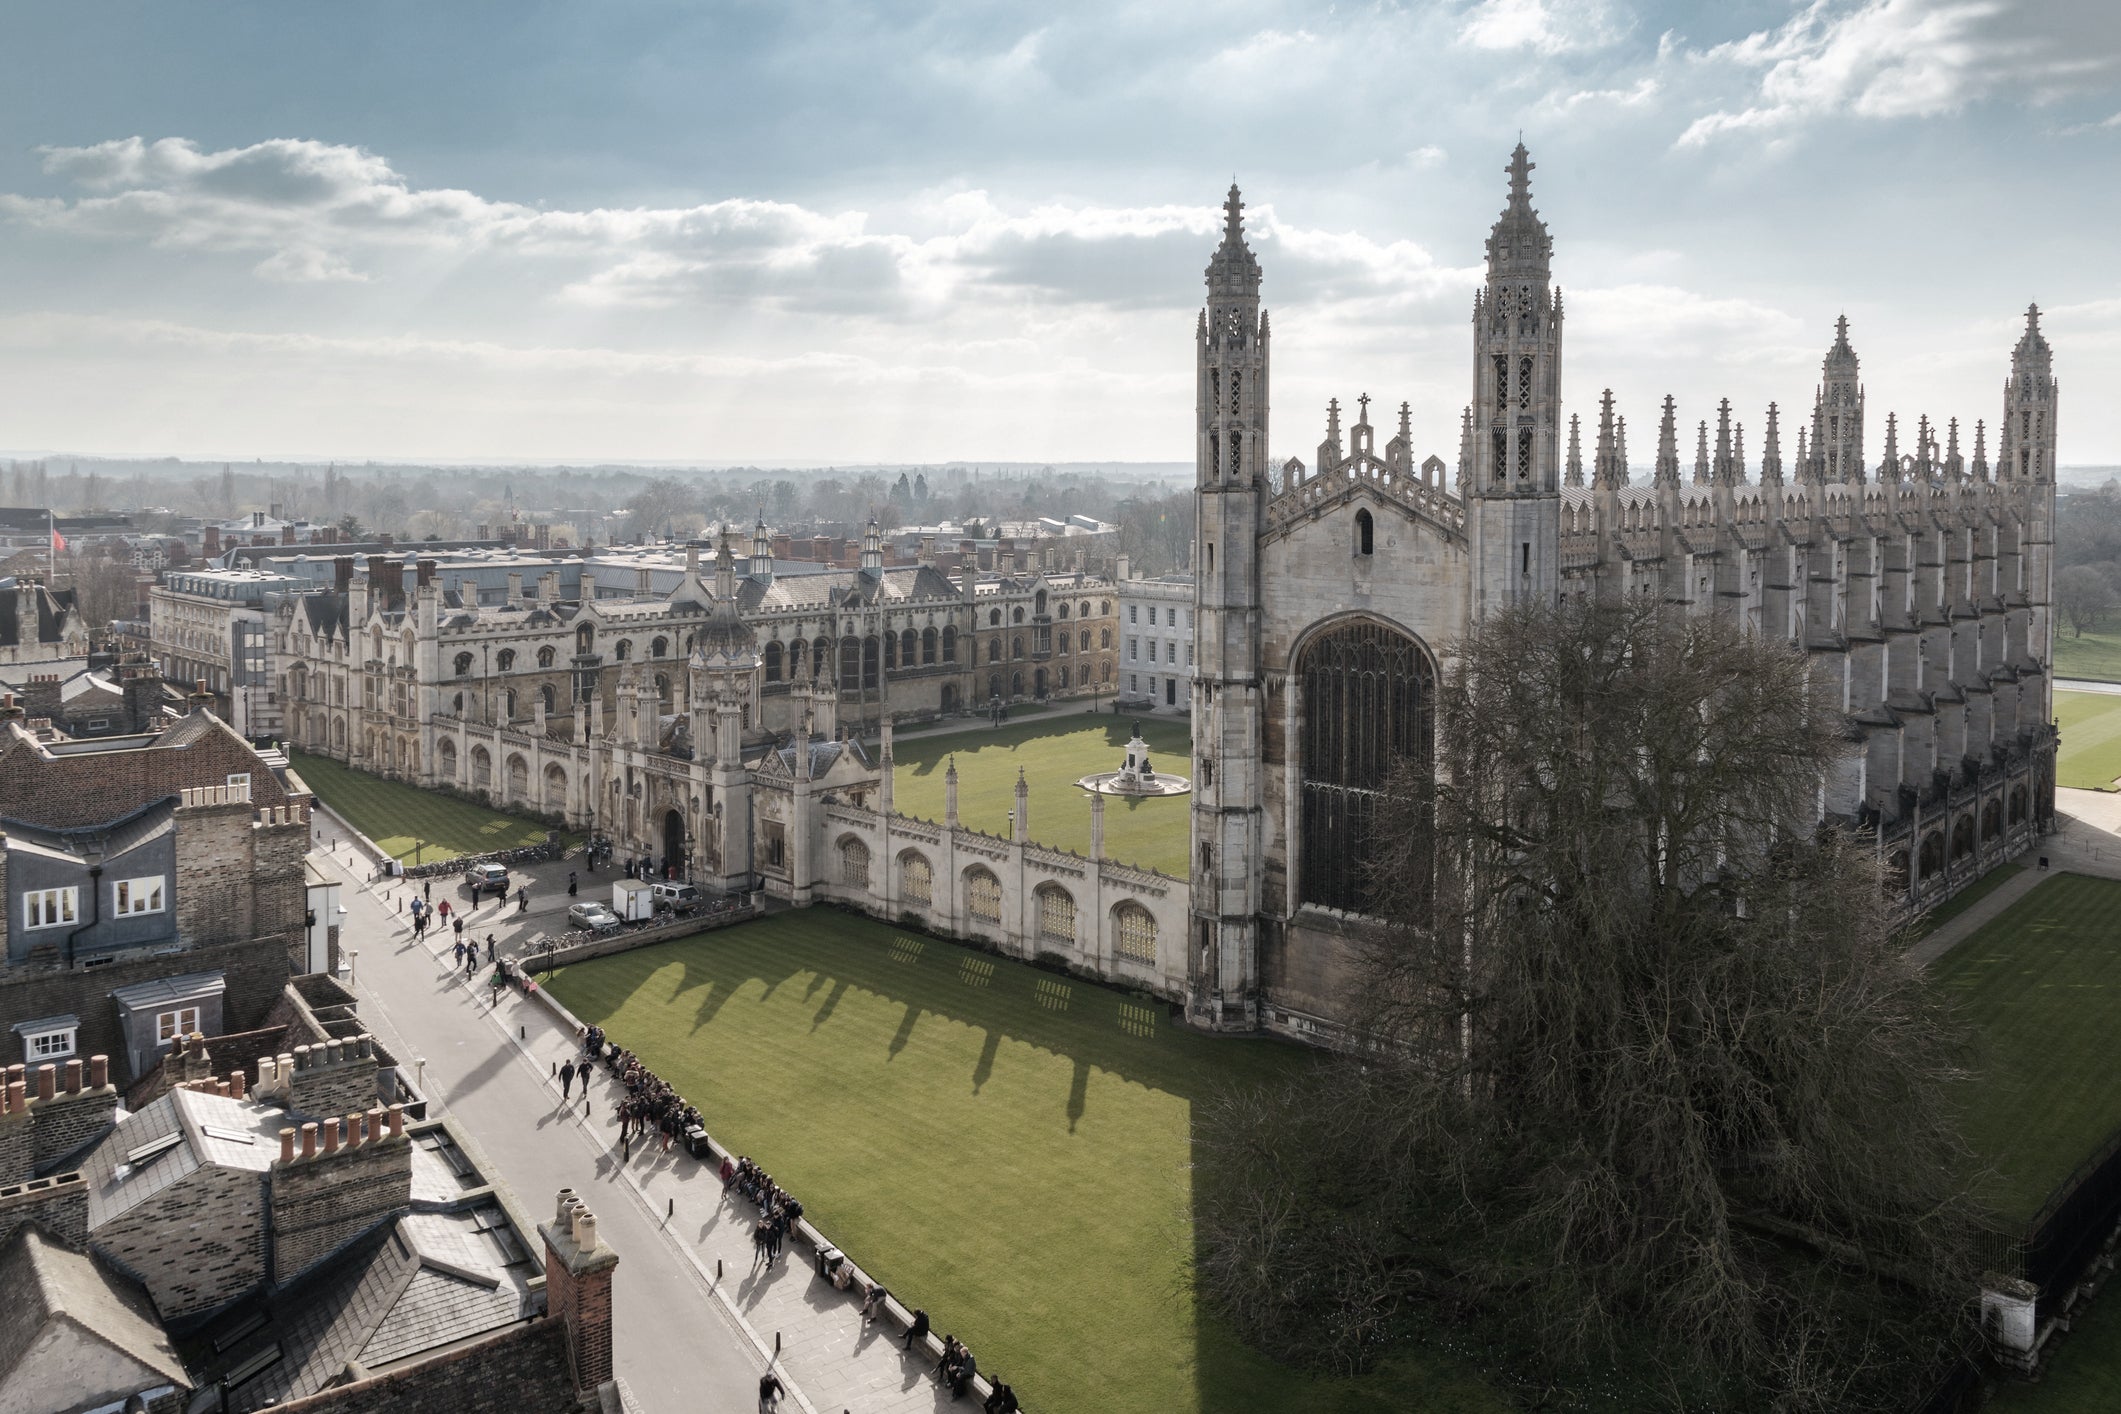 There is a sense at Cambridge of being exempt from the standards recognised by society at large